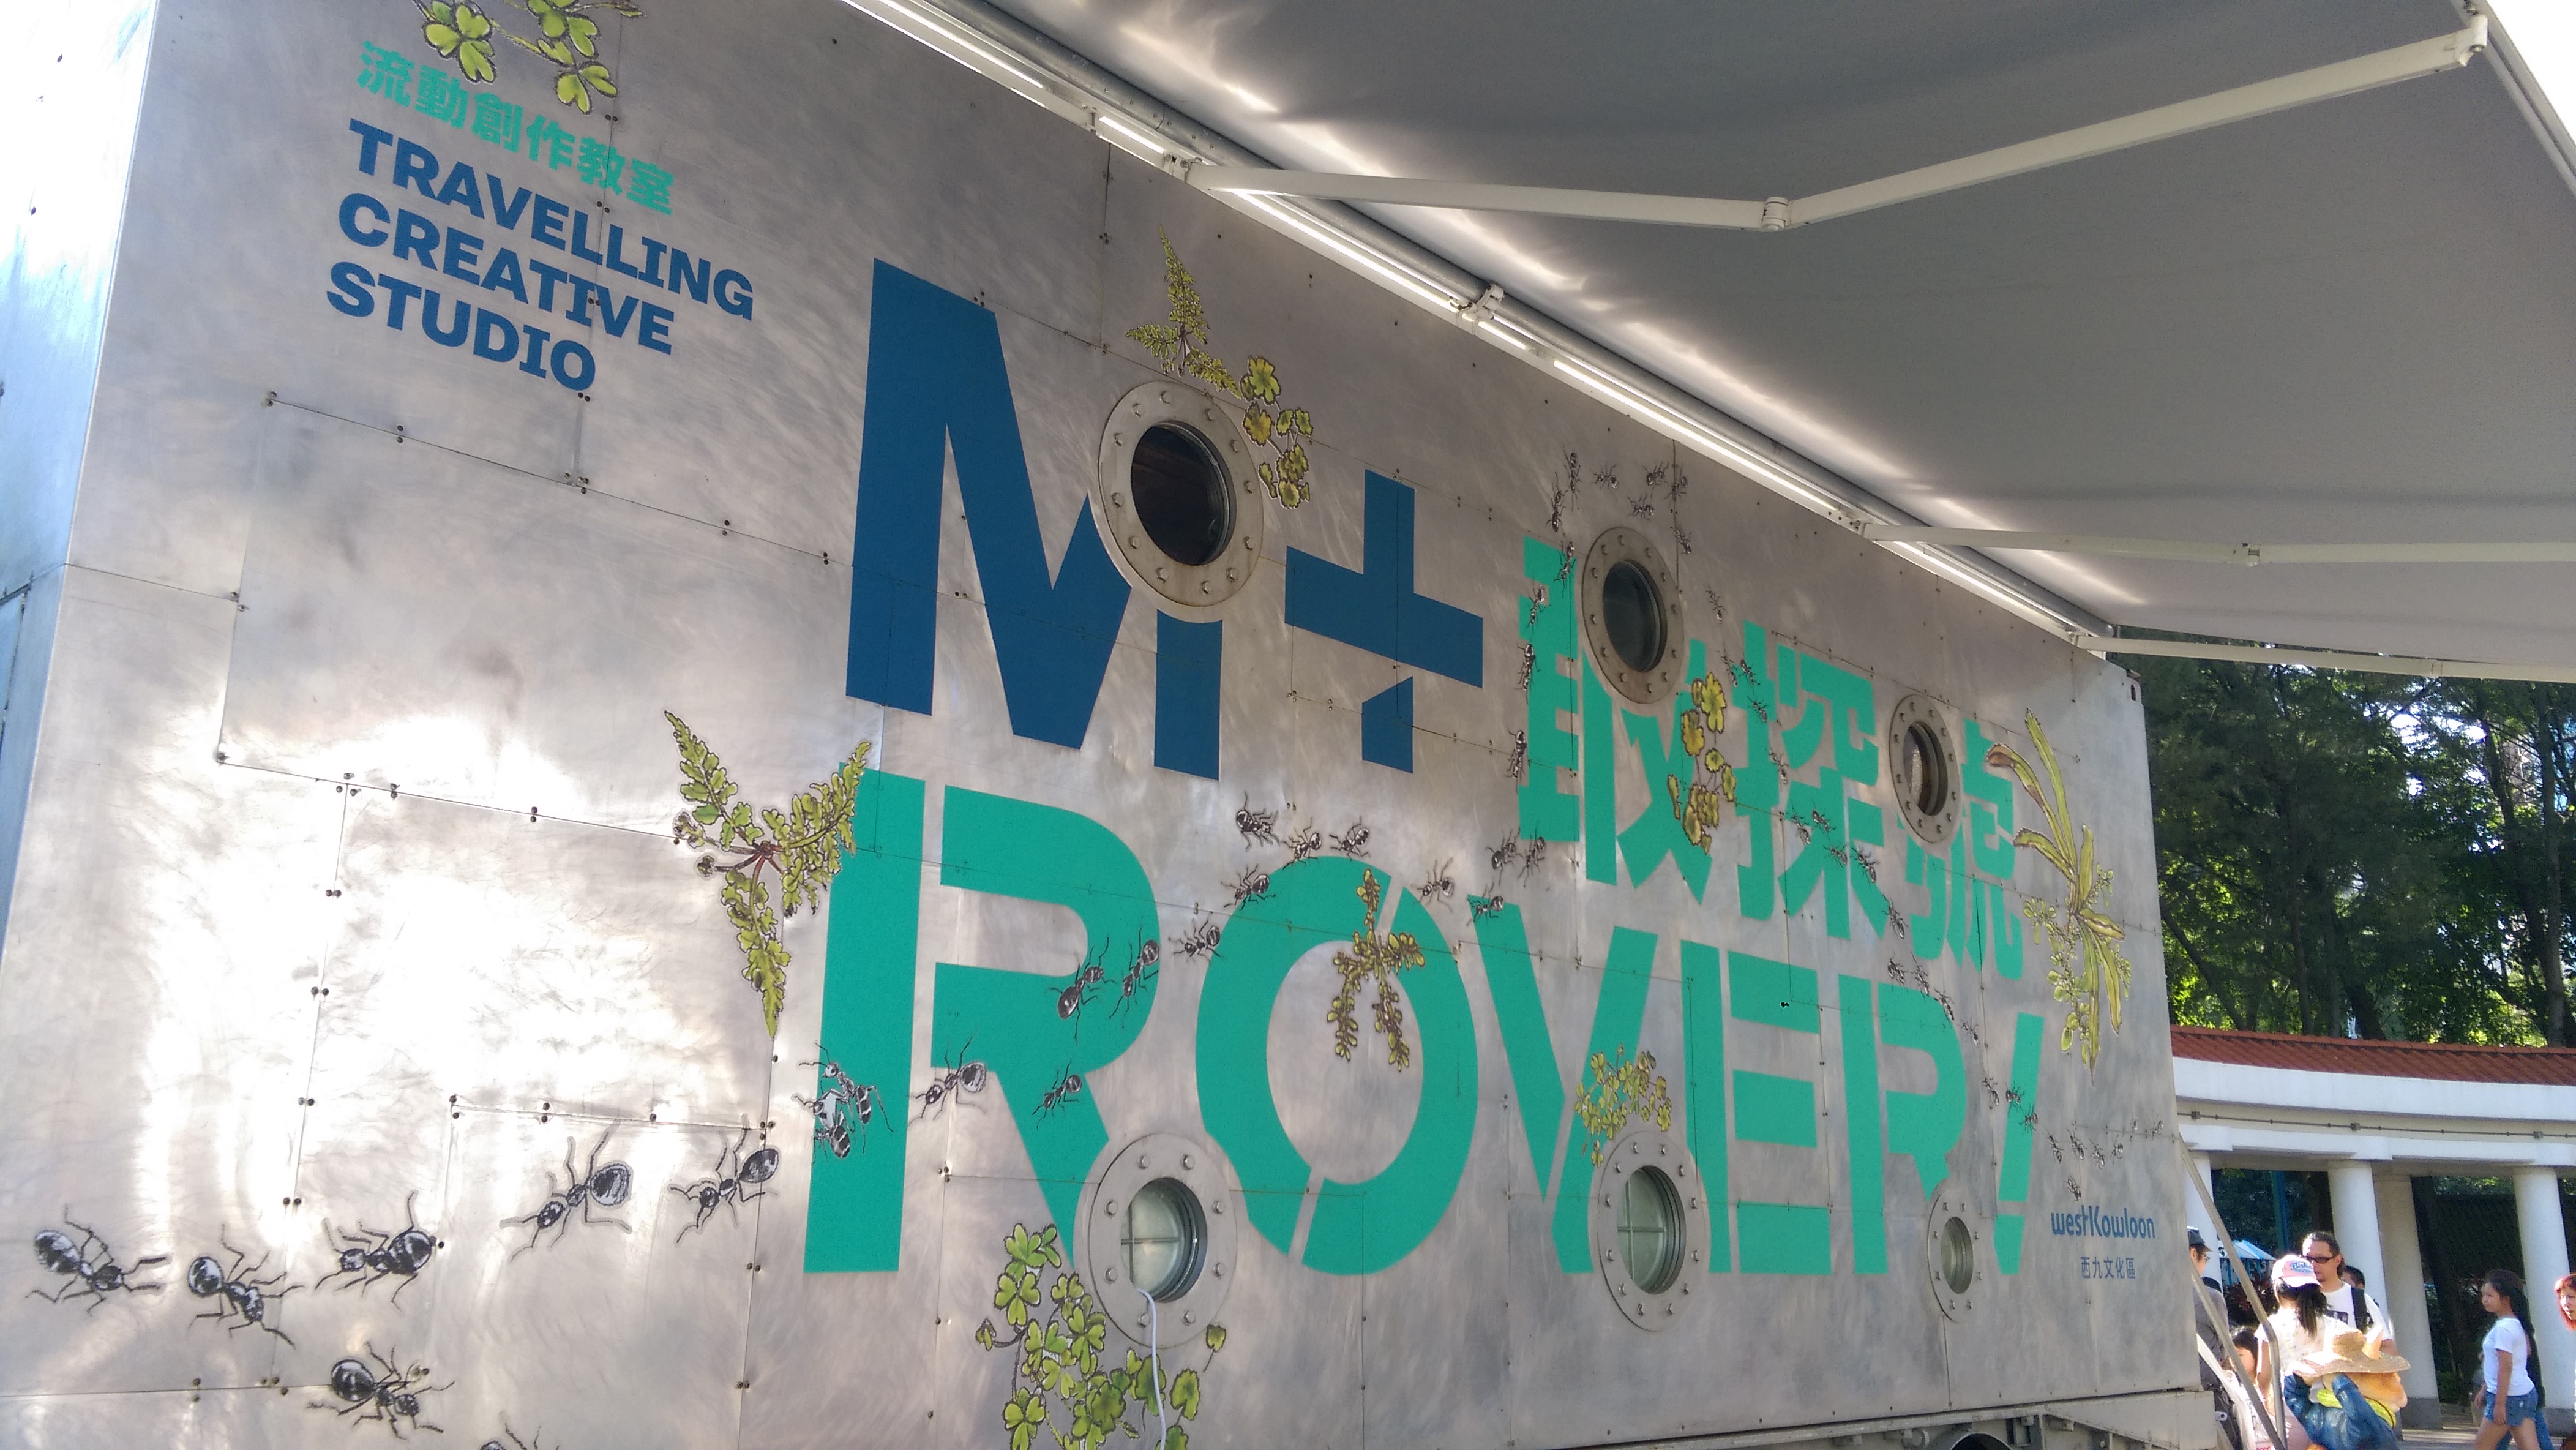 A visit to M+ Rover exhibition vehicle was a special experience for an intern.